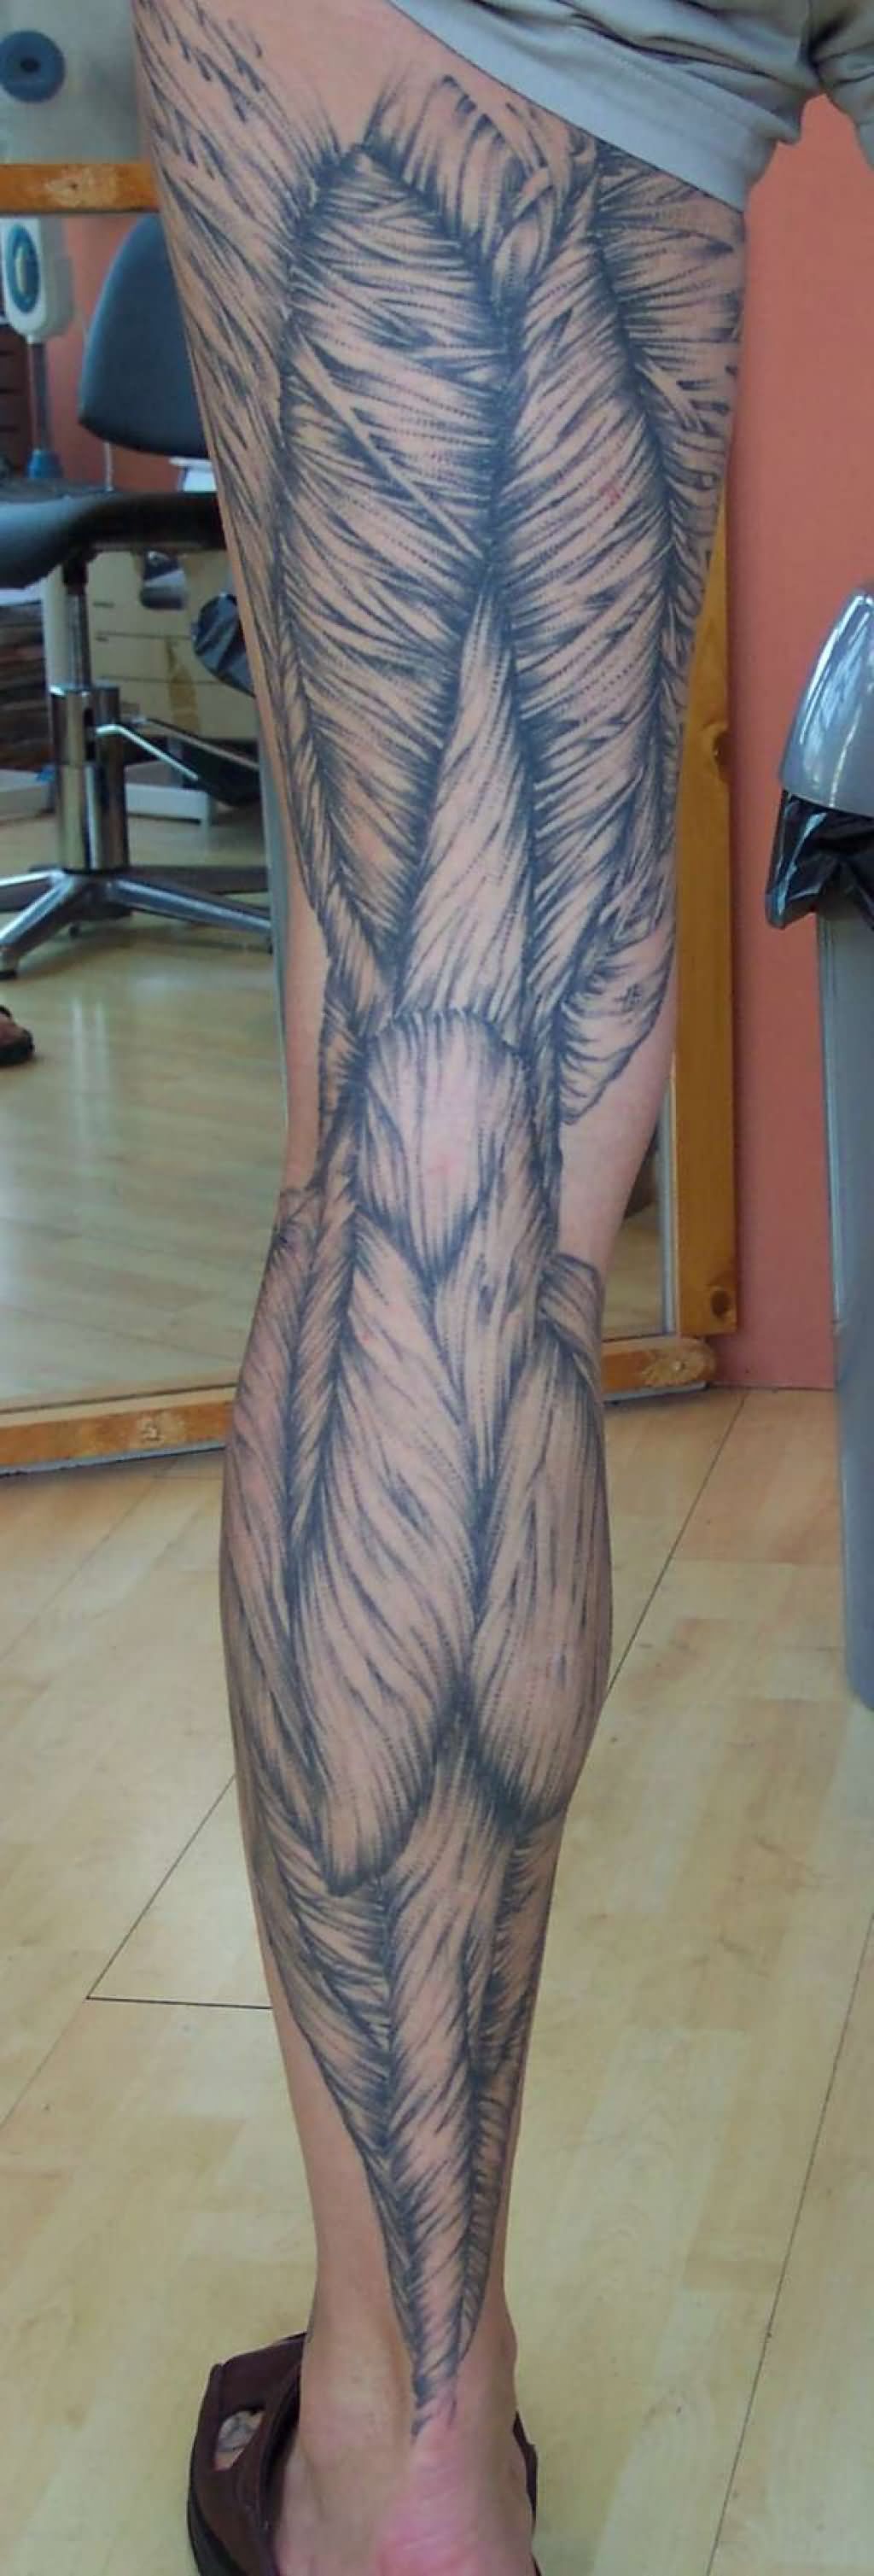 Black And Gery Muscle Tattoo On Full Leg